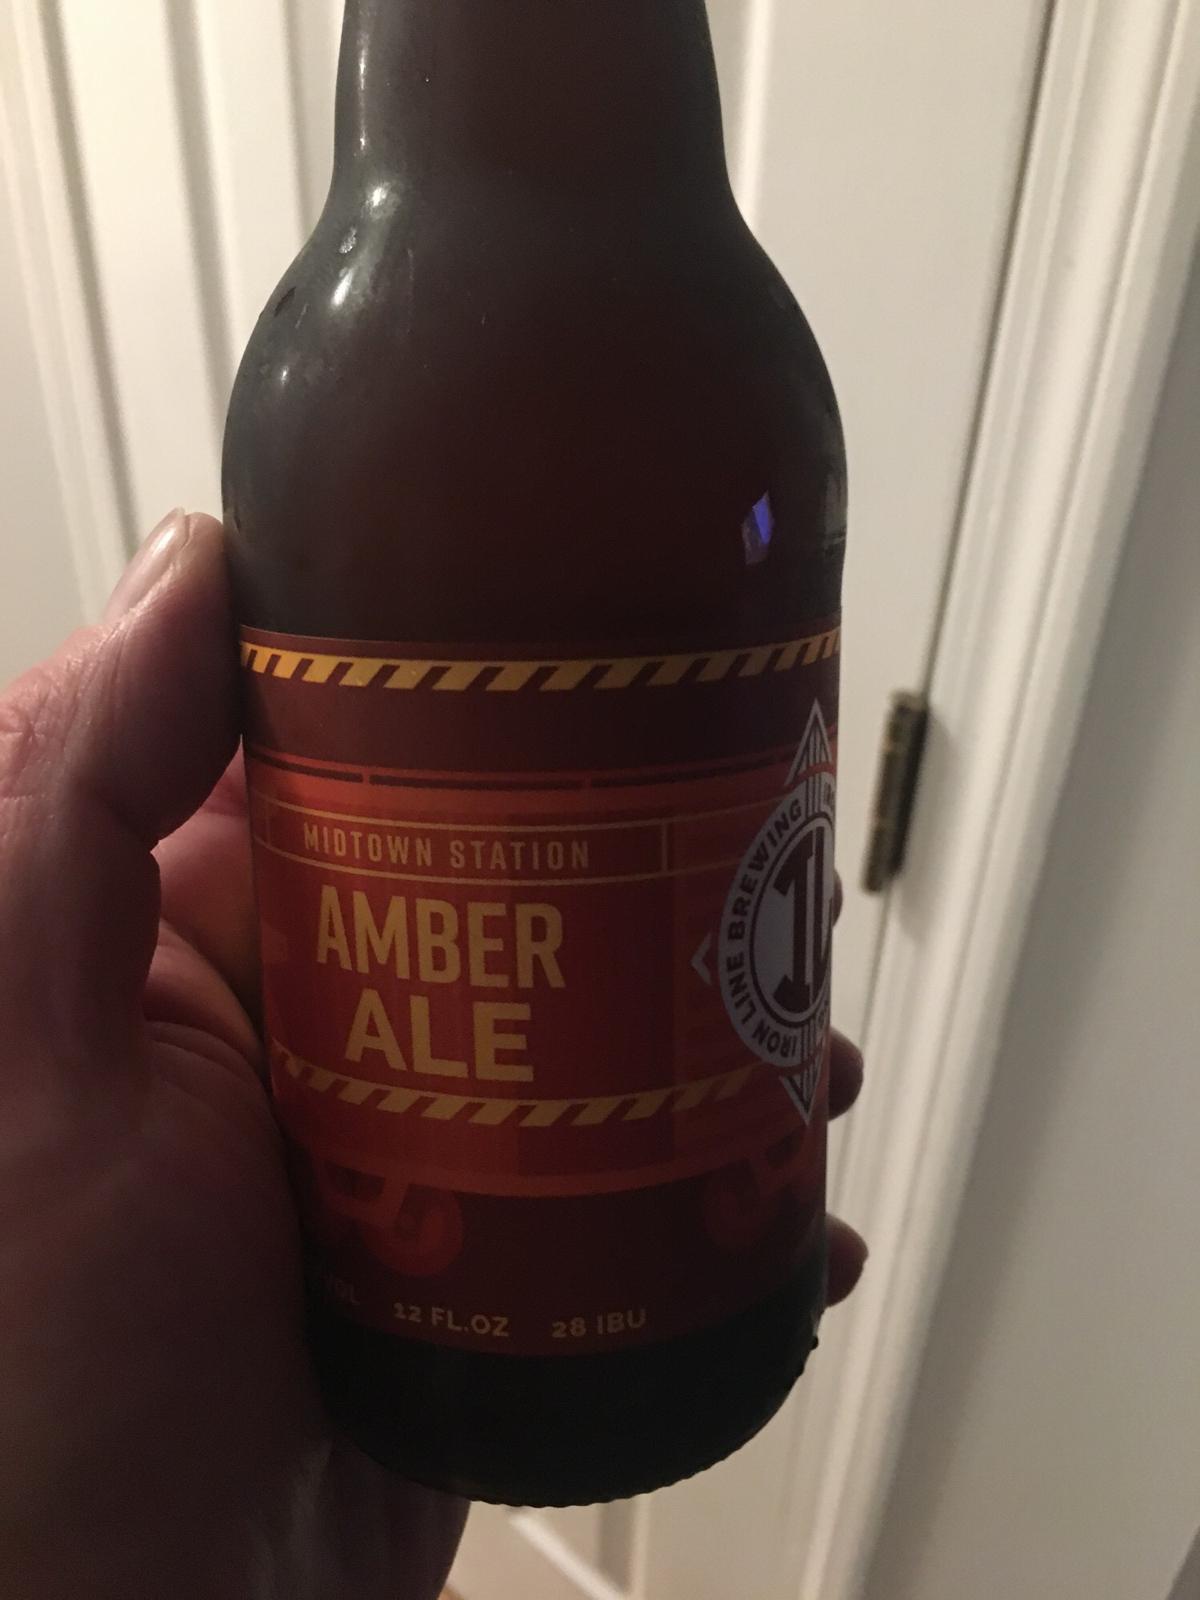 Midtown Station Amber Ale